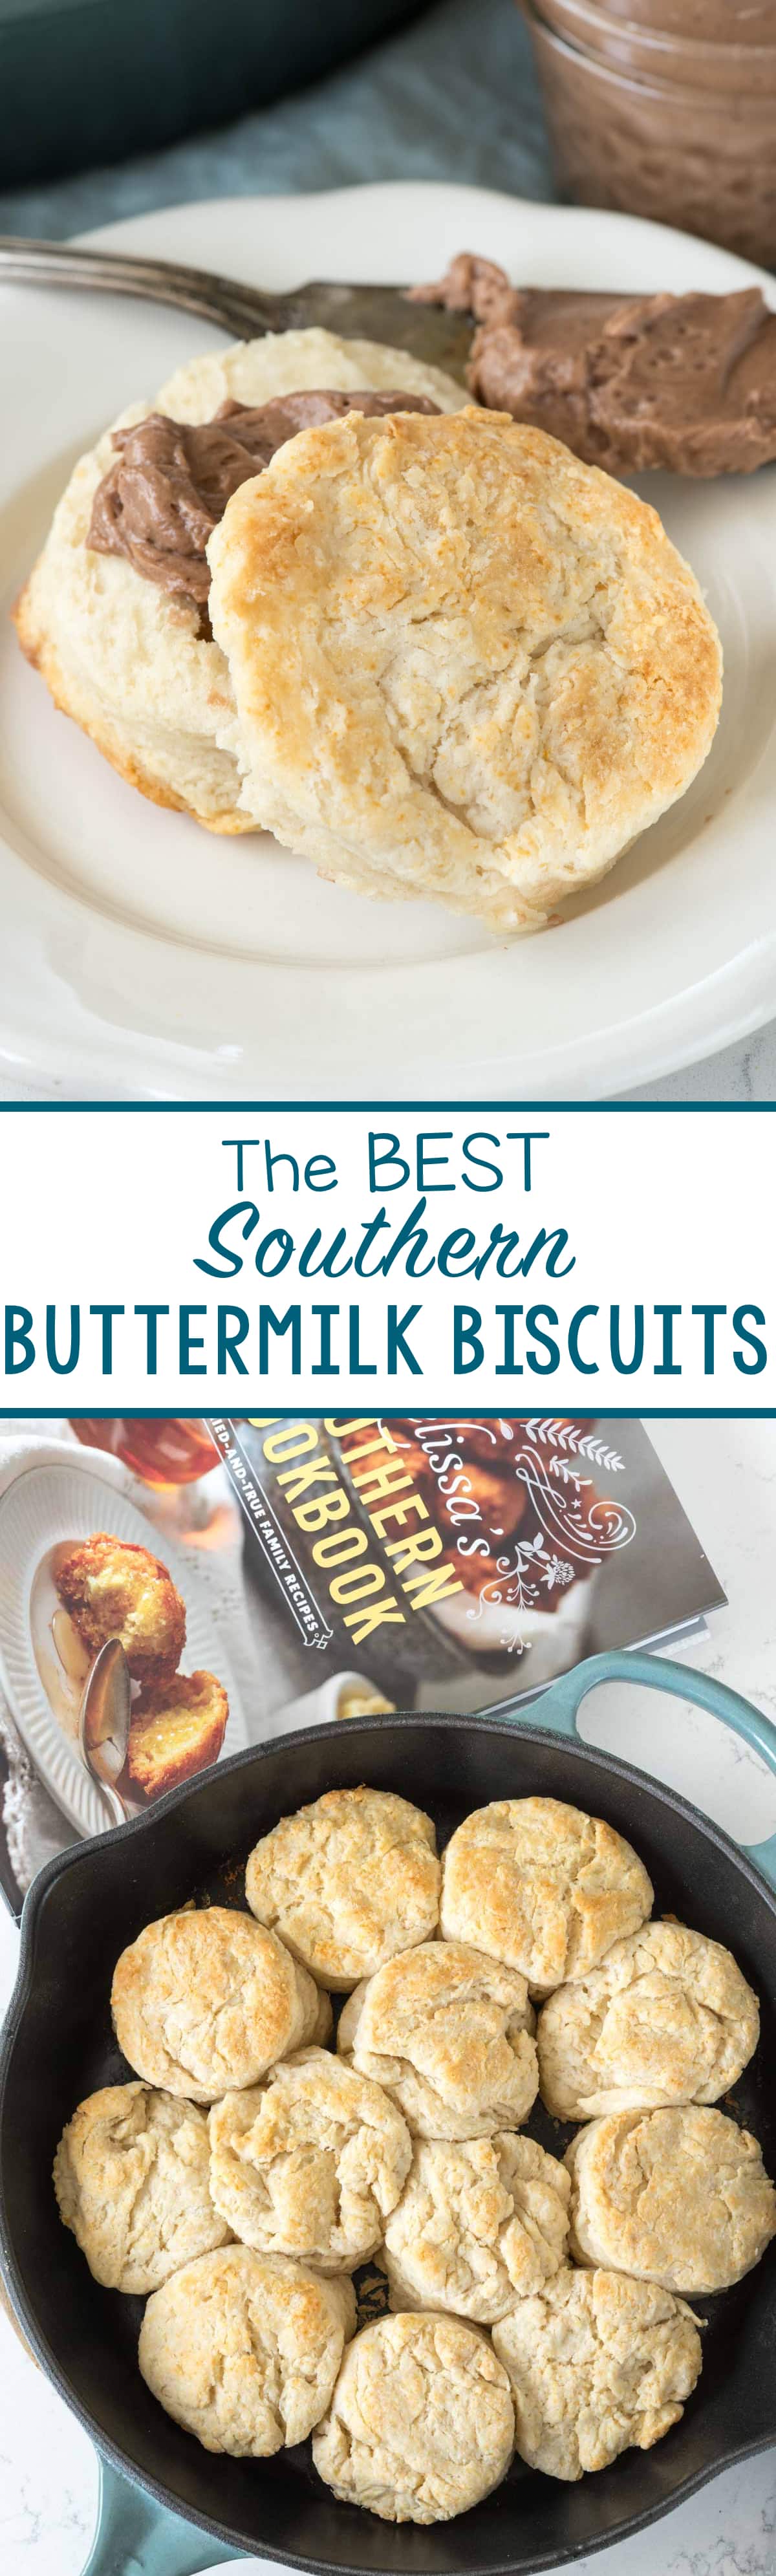 The BEST Southern Buttermilk Biscuits by Melissa's Southern Cookbook - this recipe is a keeper!